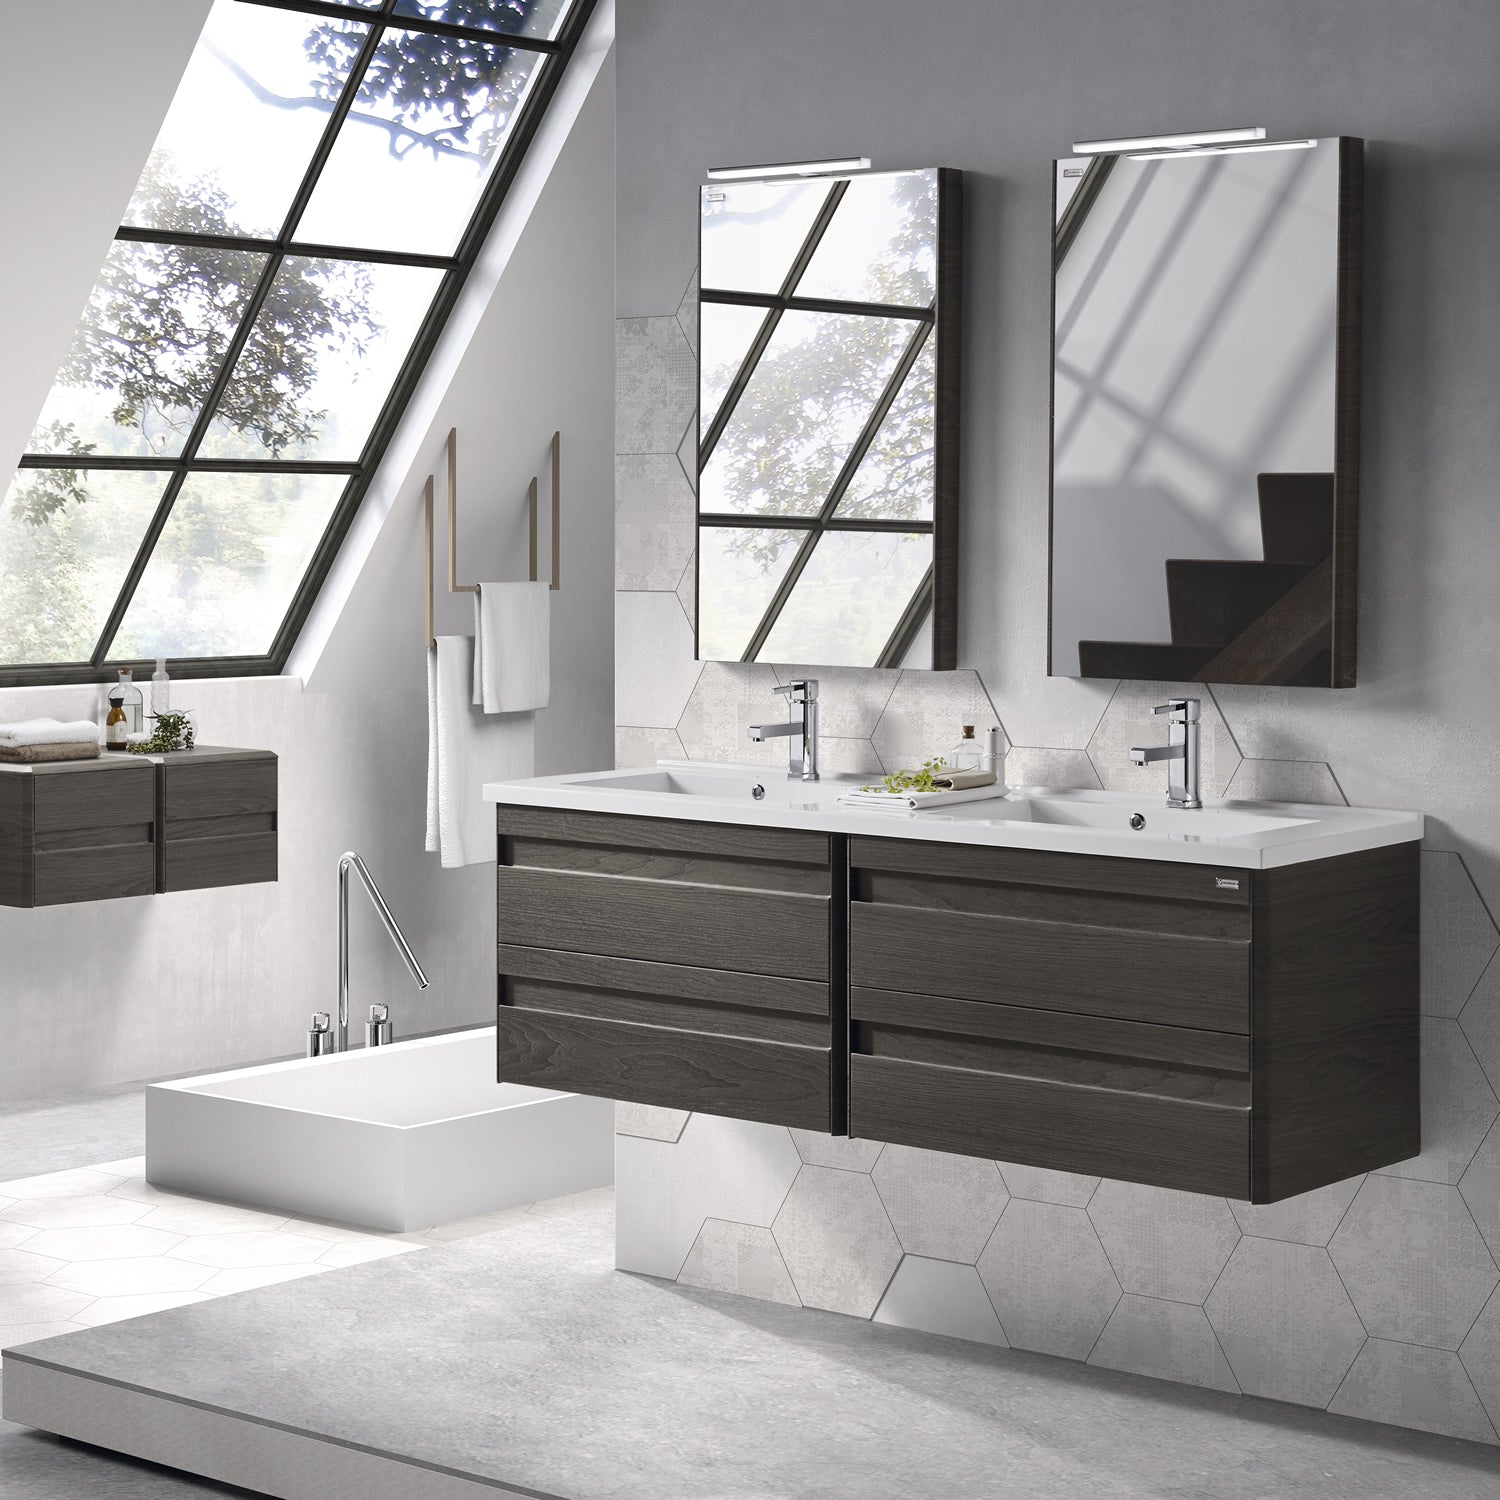 48" Single Vanity, Wall Mount, 2 Drawers with Soft Close, Cloud, Serie Barcelona by VALENZUELA